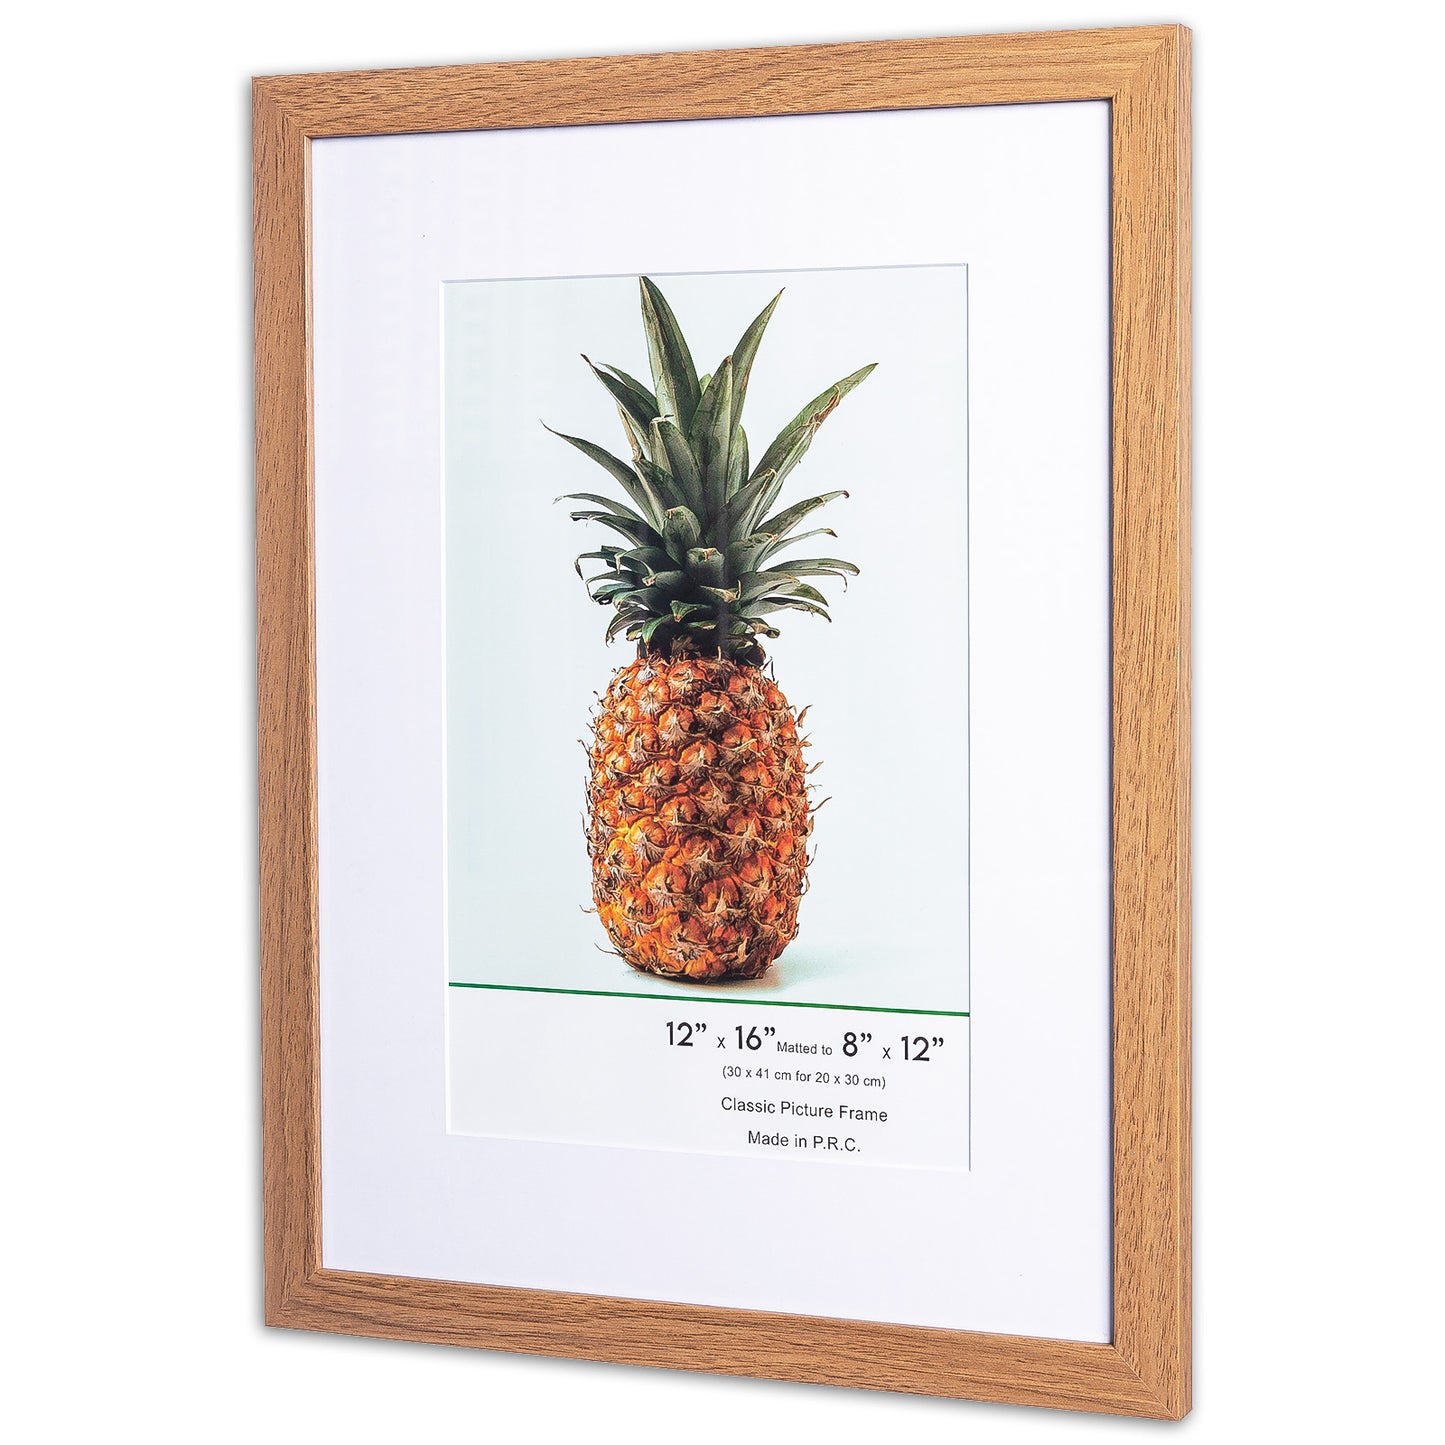 12" x 16” Classic Light Oak MDF Wood Picture Frame with Tempered Glass, 8" x 12" Matted